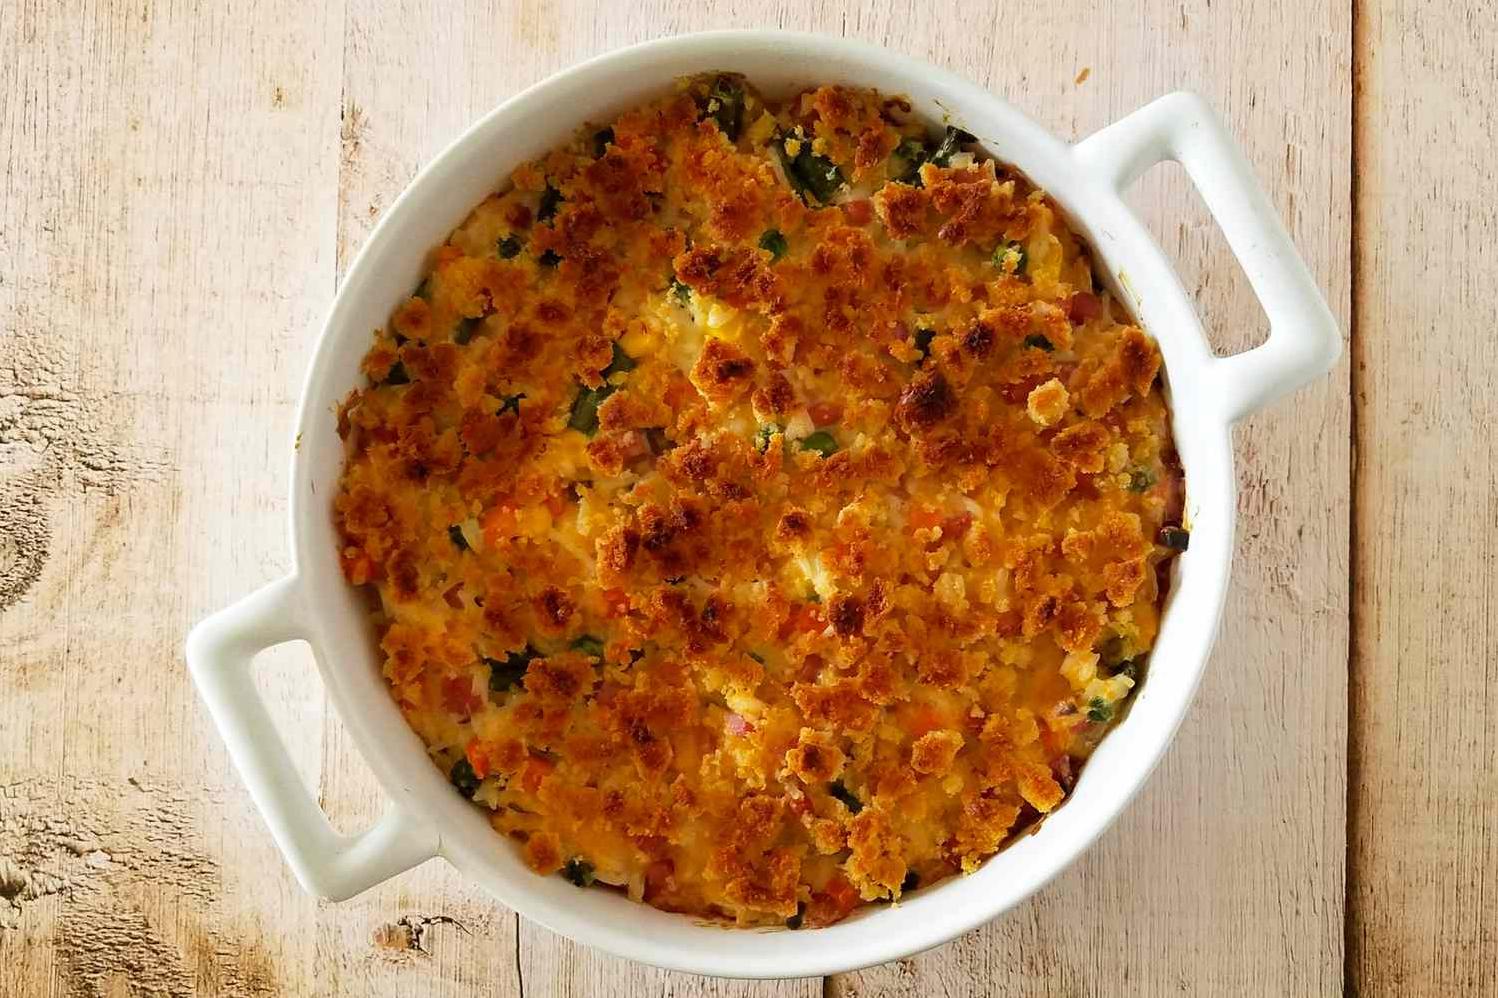  With a crispy top layer and a gooey center, this casserole is the epitome of texture perfection.